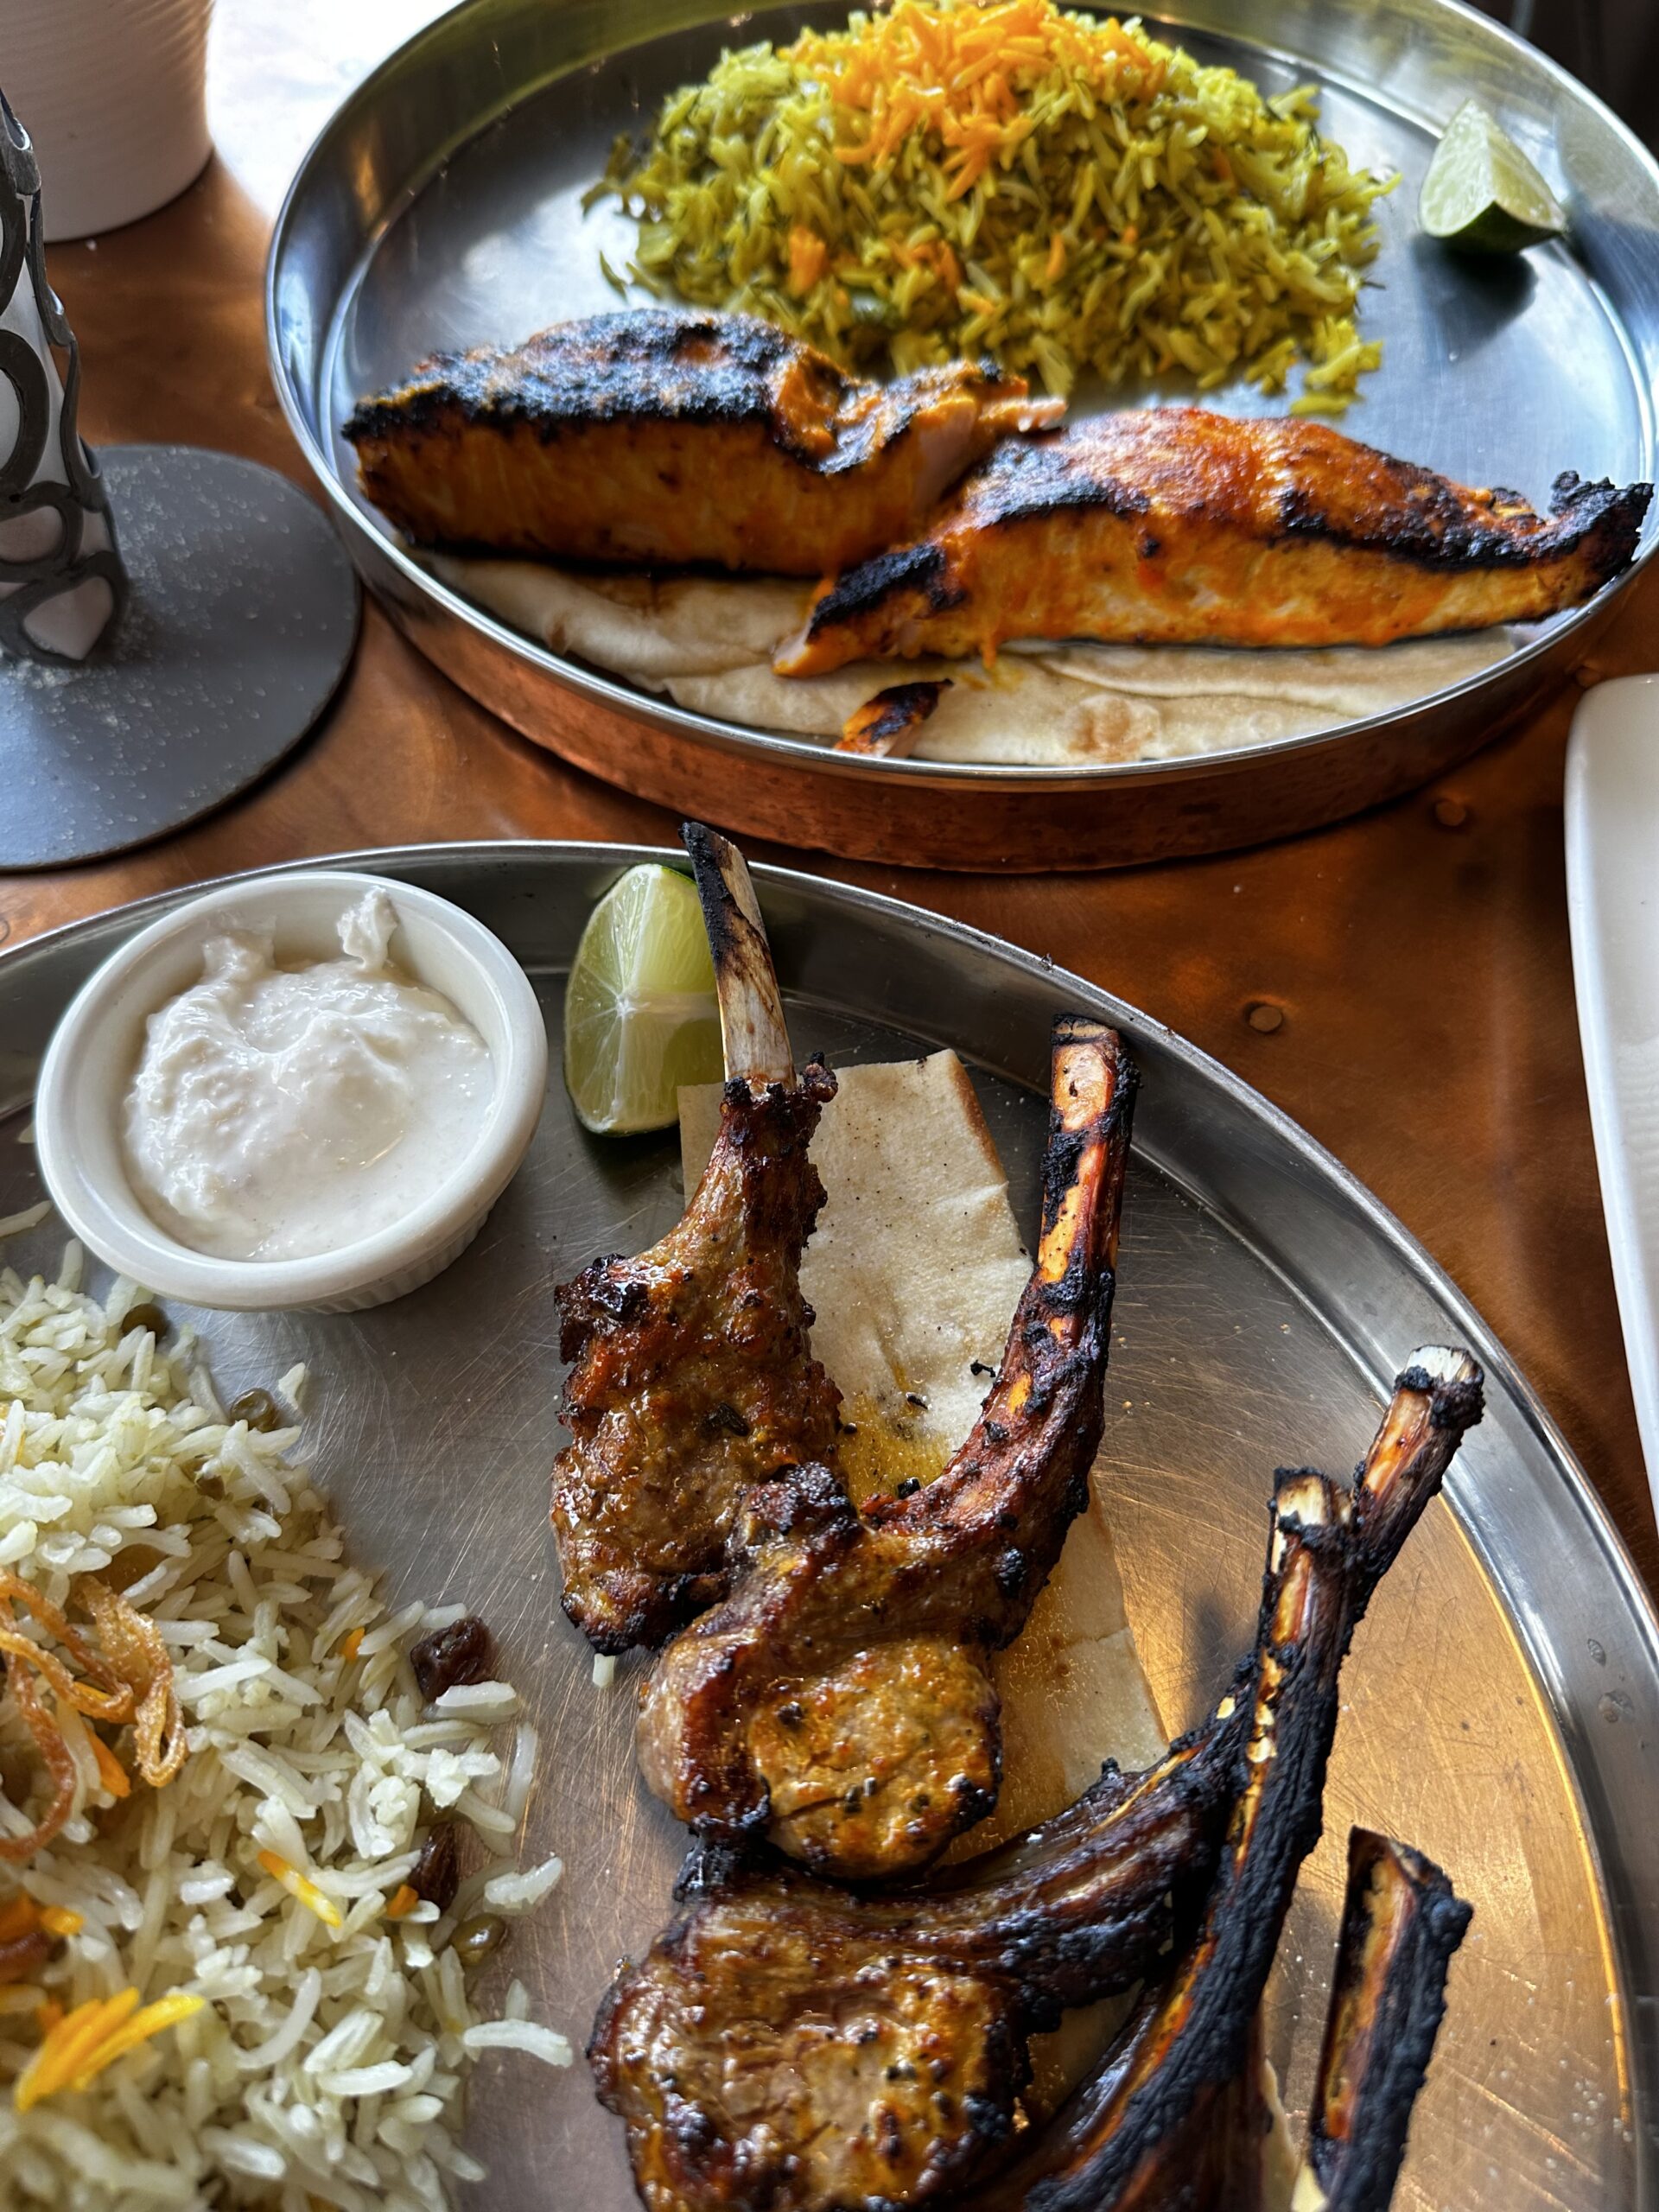 “Zafron Persian Restaurant: A Culinary Journey Through Persian Delights”